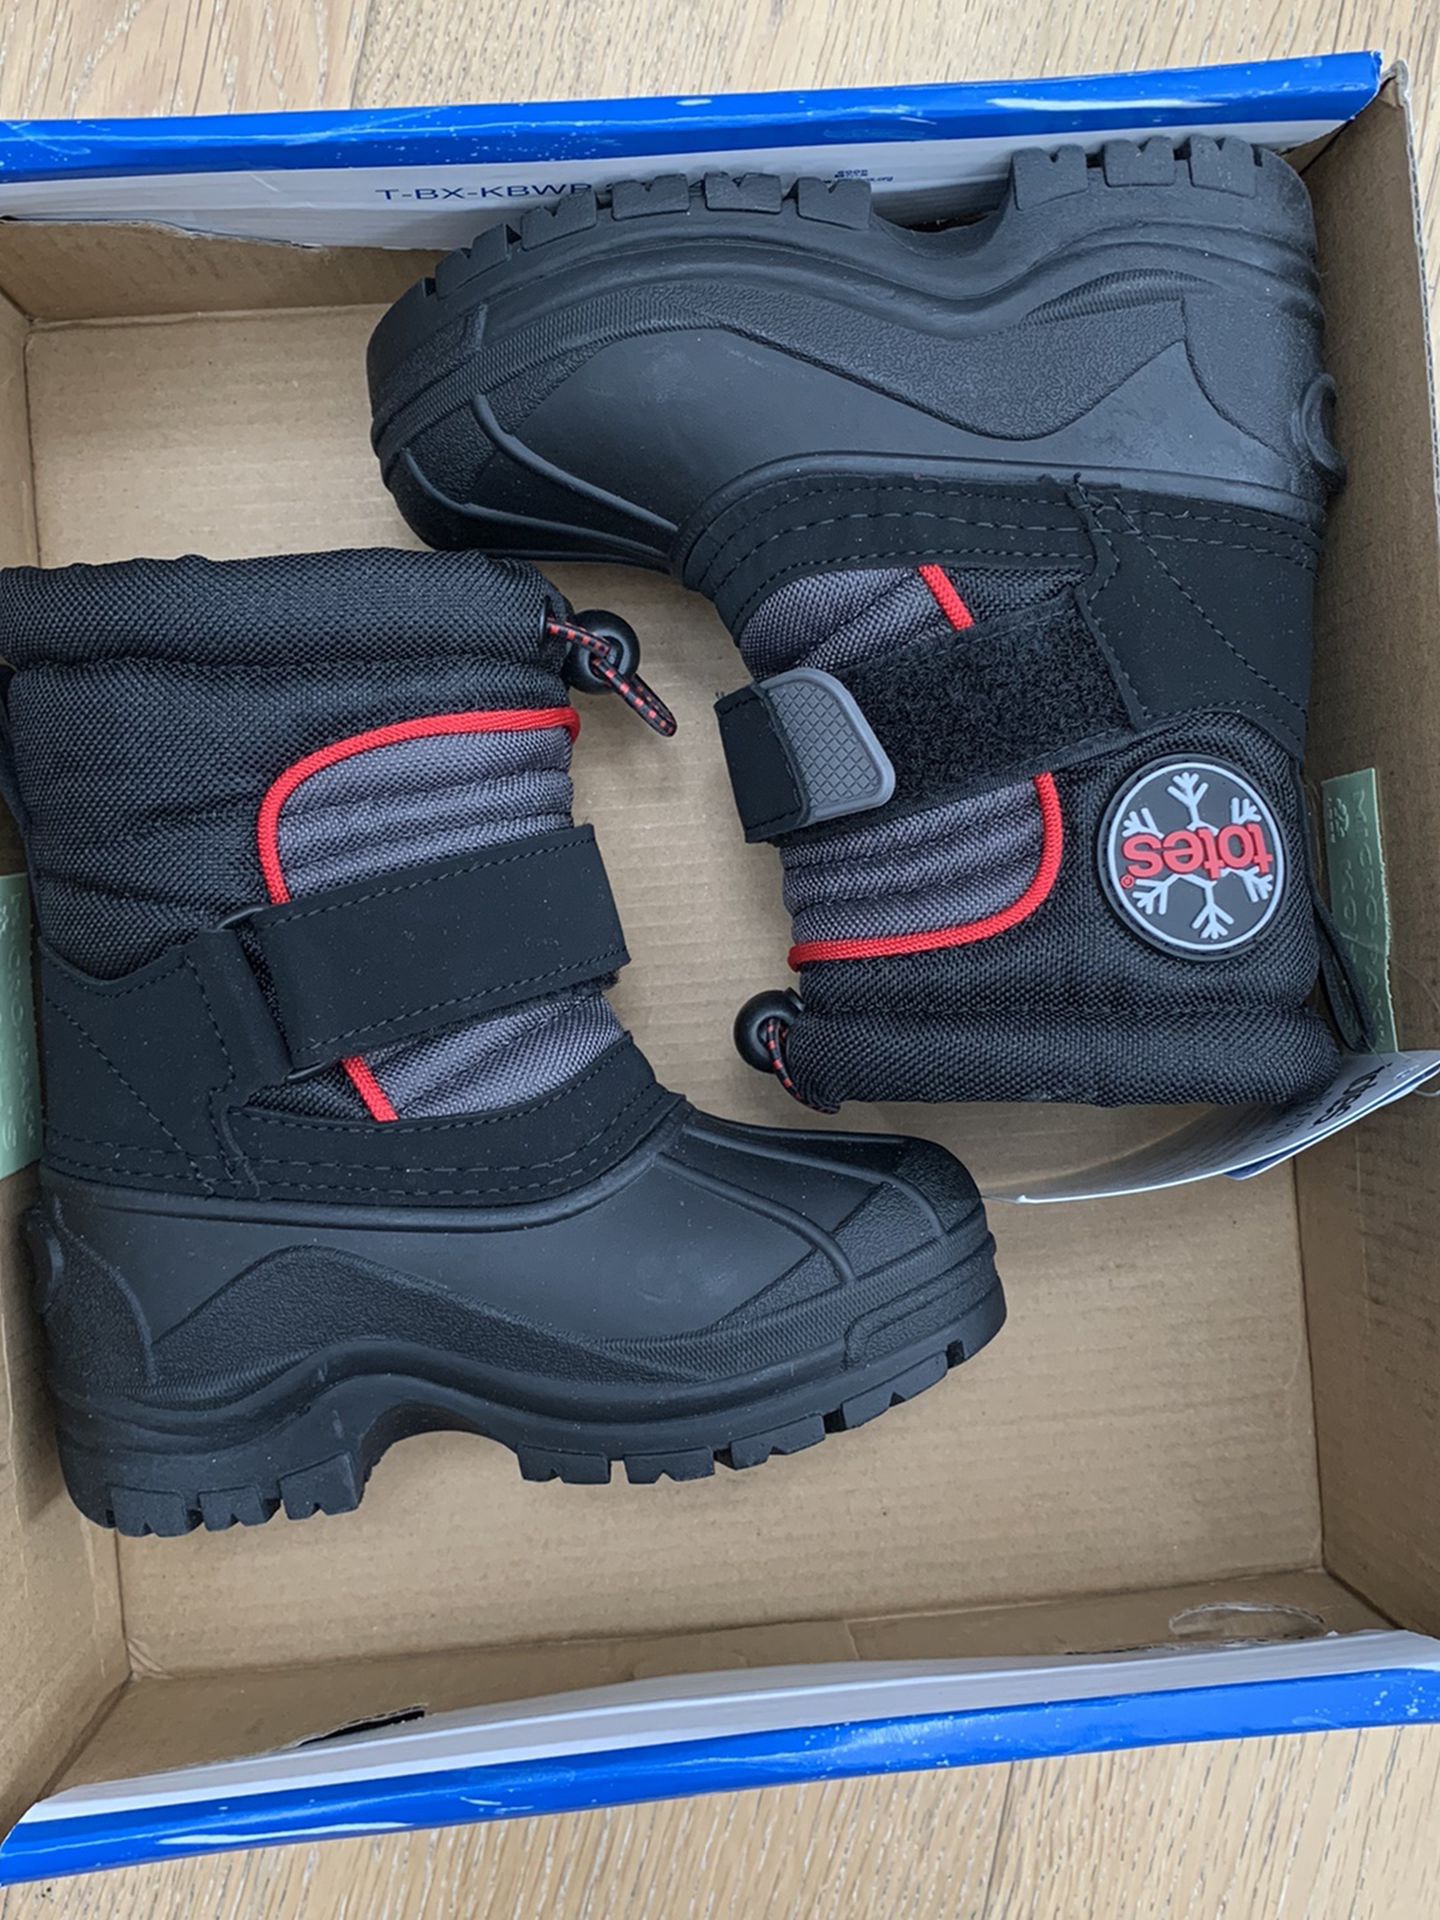 Toddler Snow Boots BRAND NEW